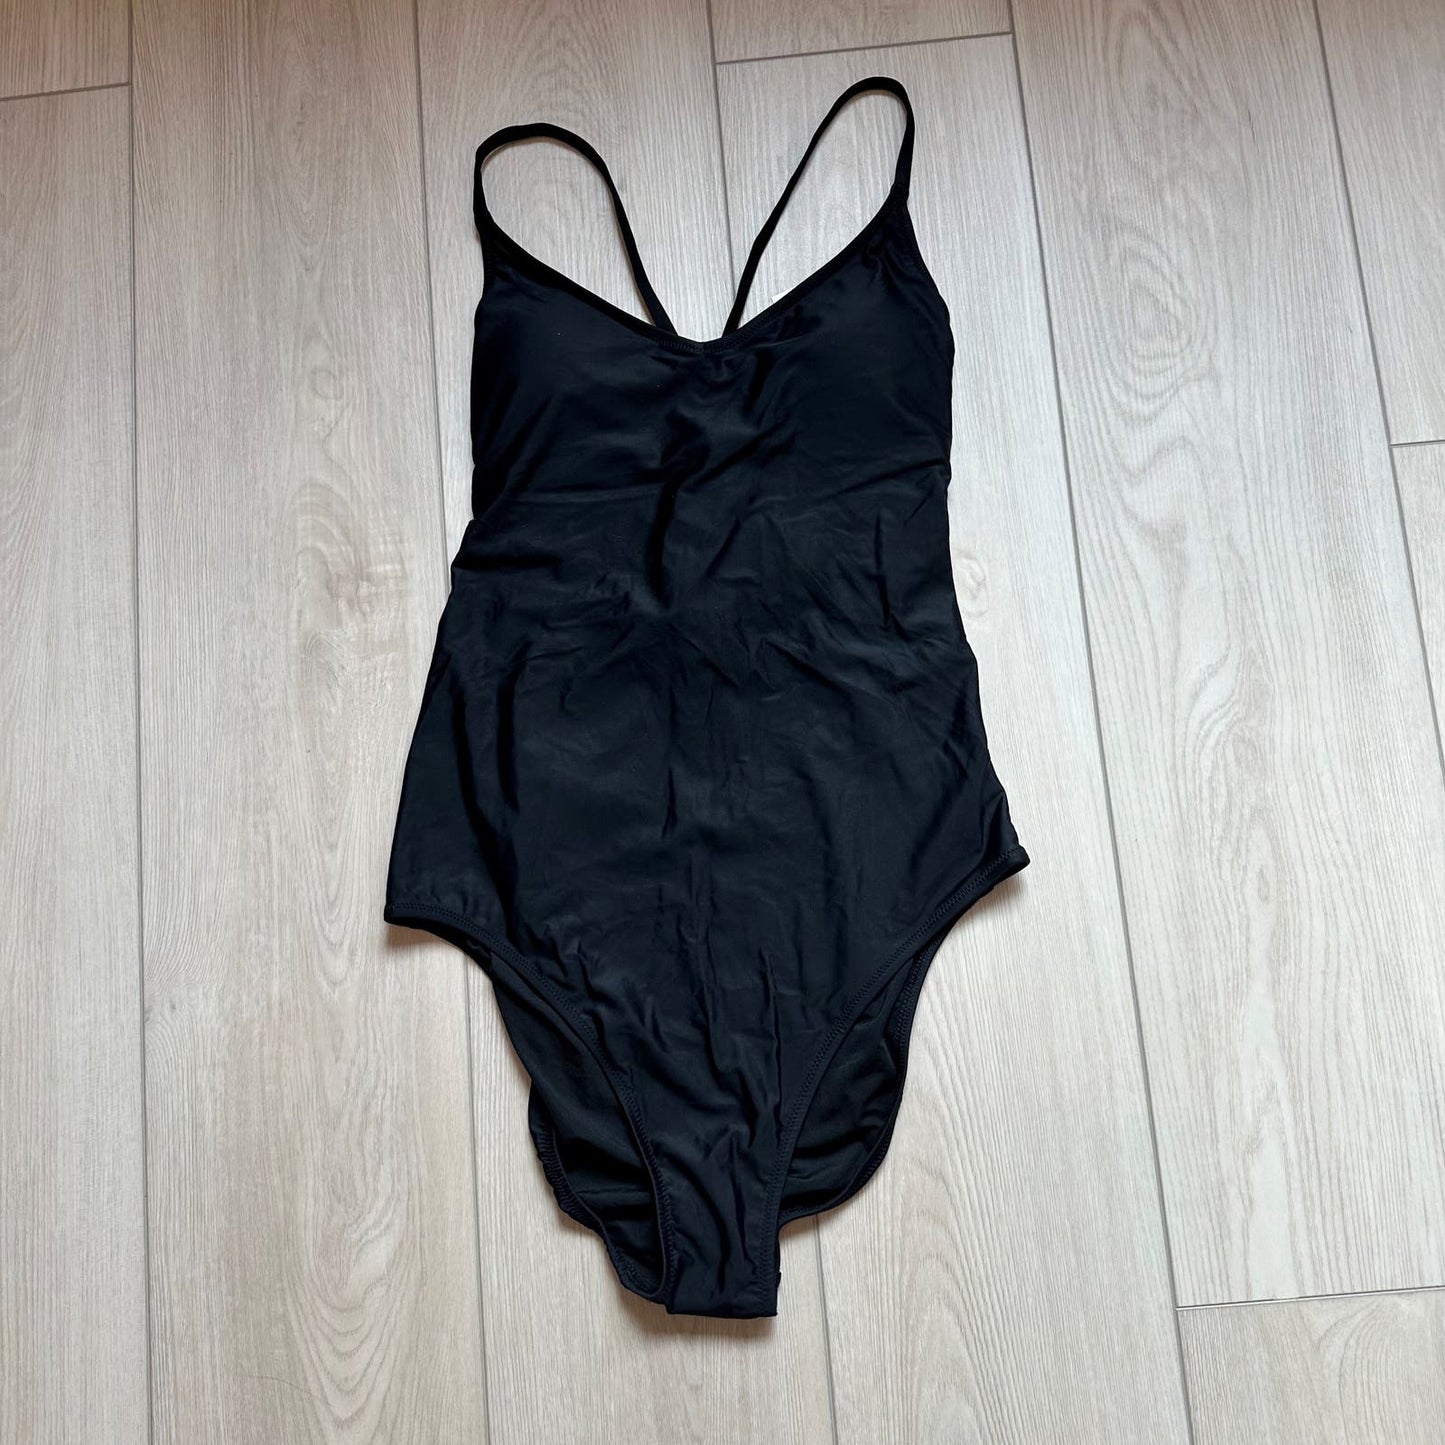 Aerie black strappy full coverage one piece swimsuit